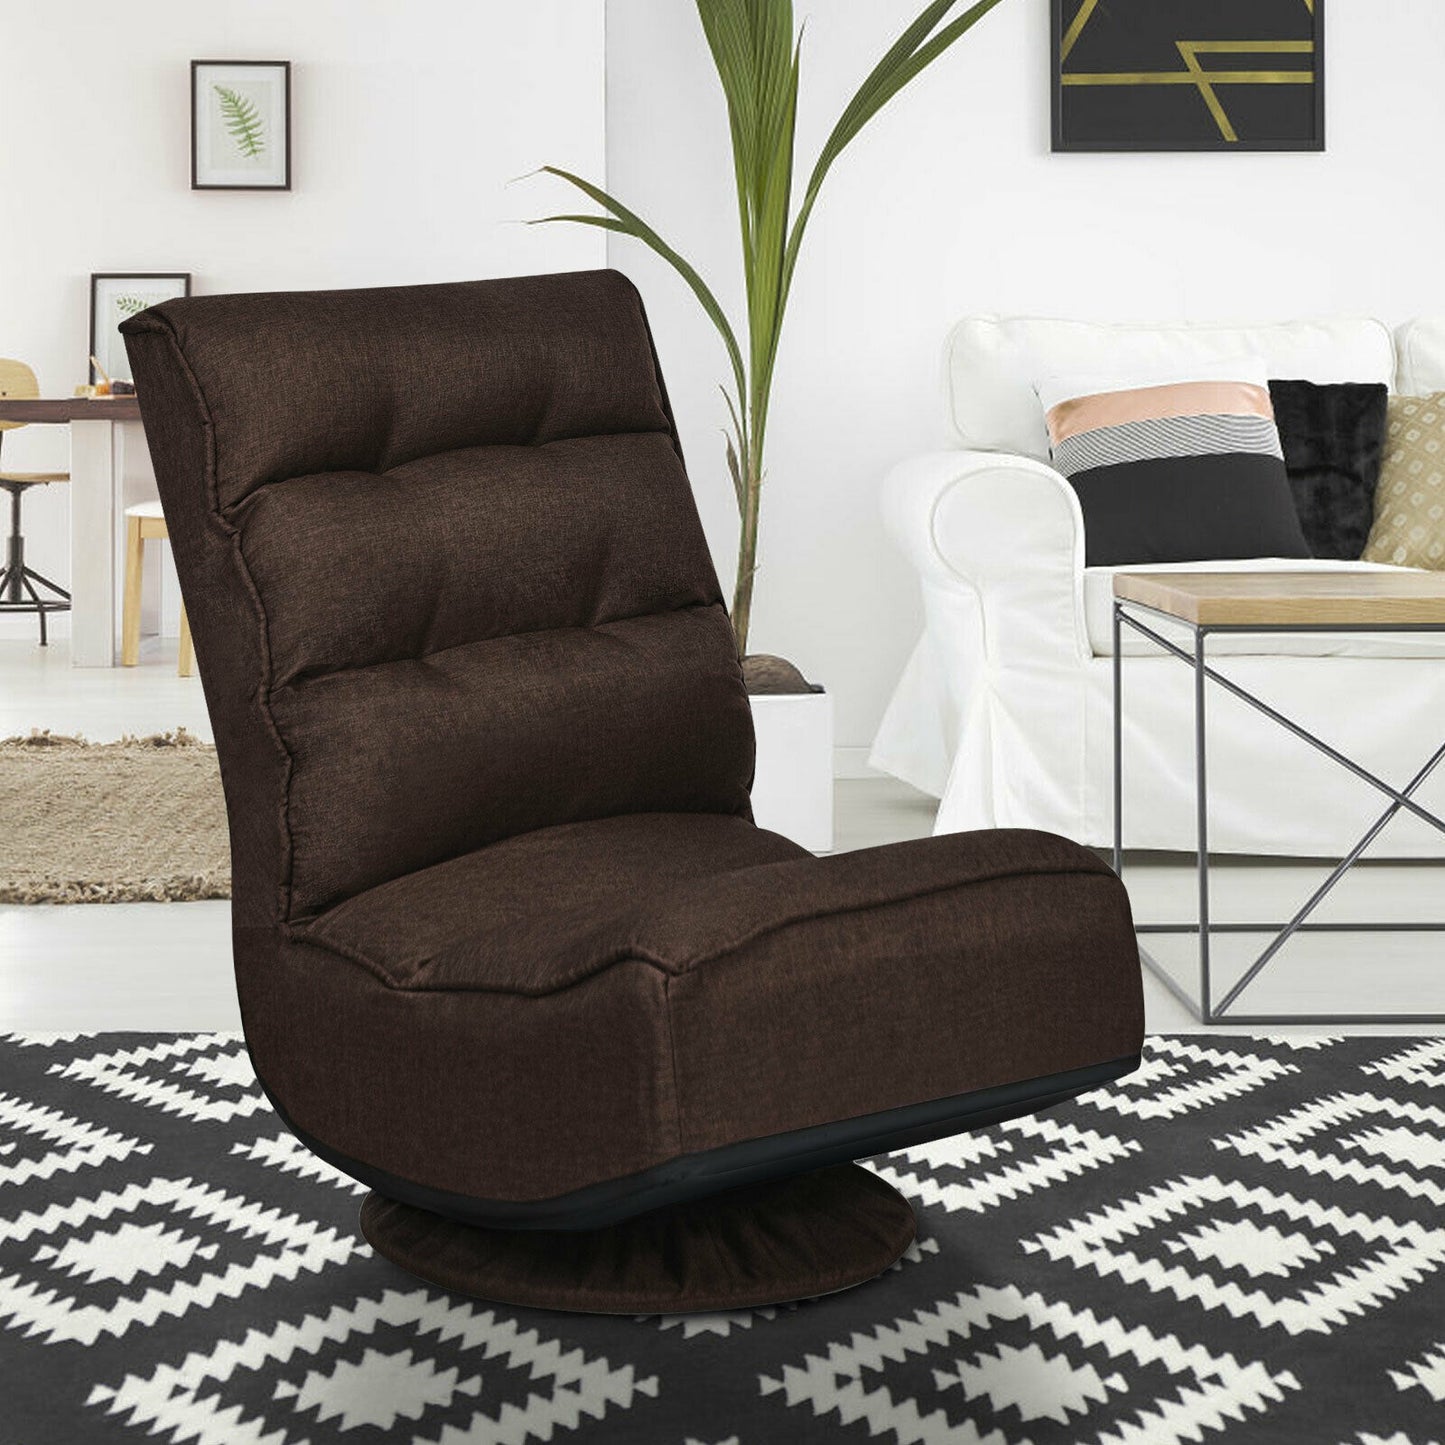 5-Position Folding Floor Gaming Chair-Brown